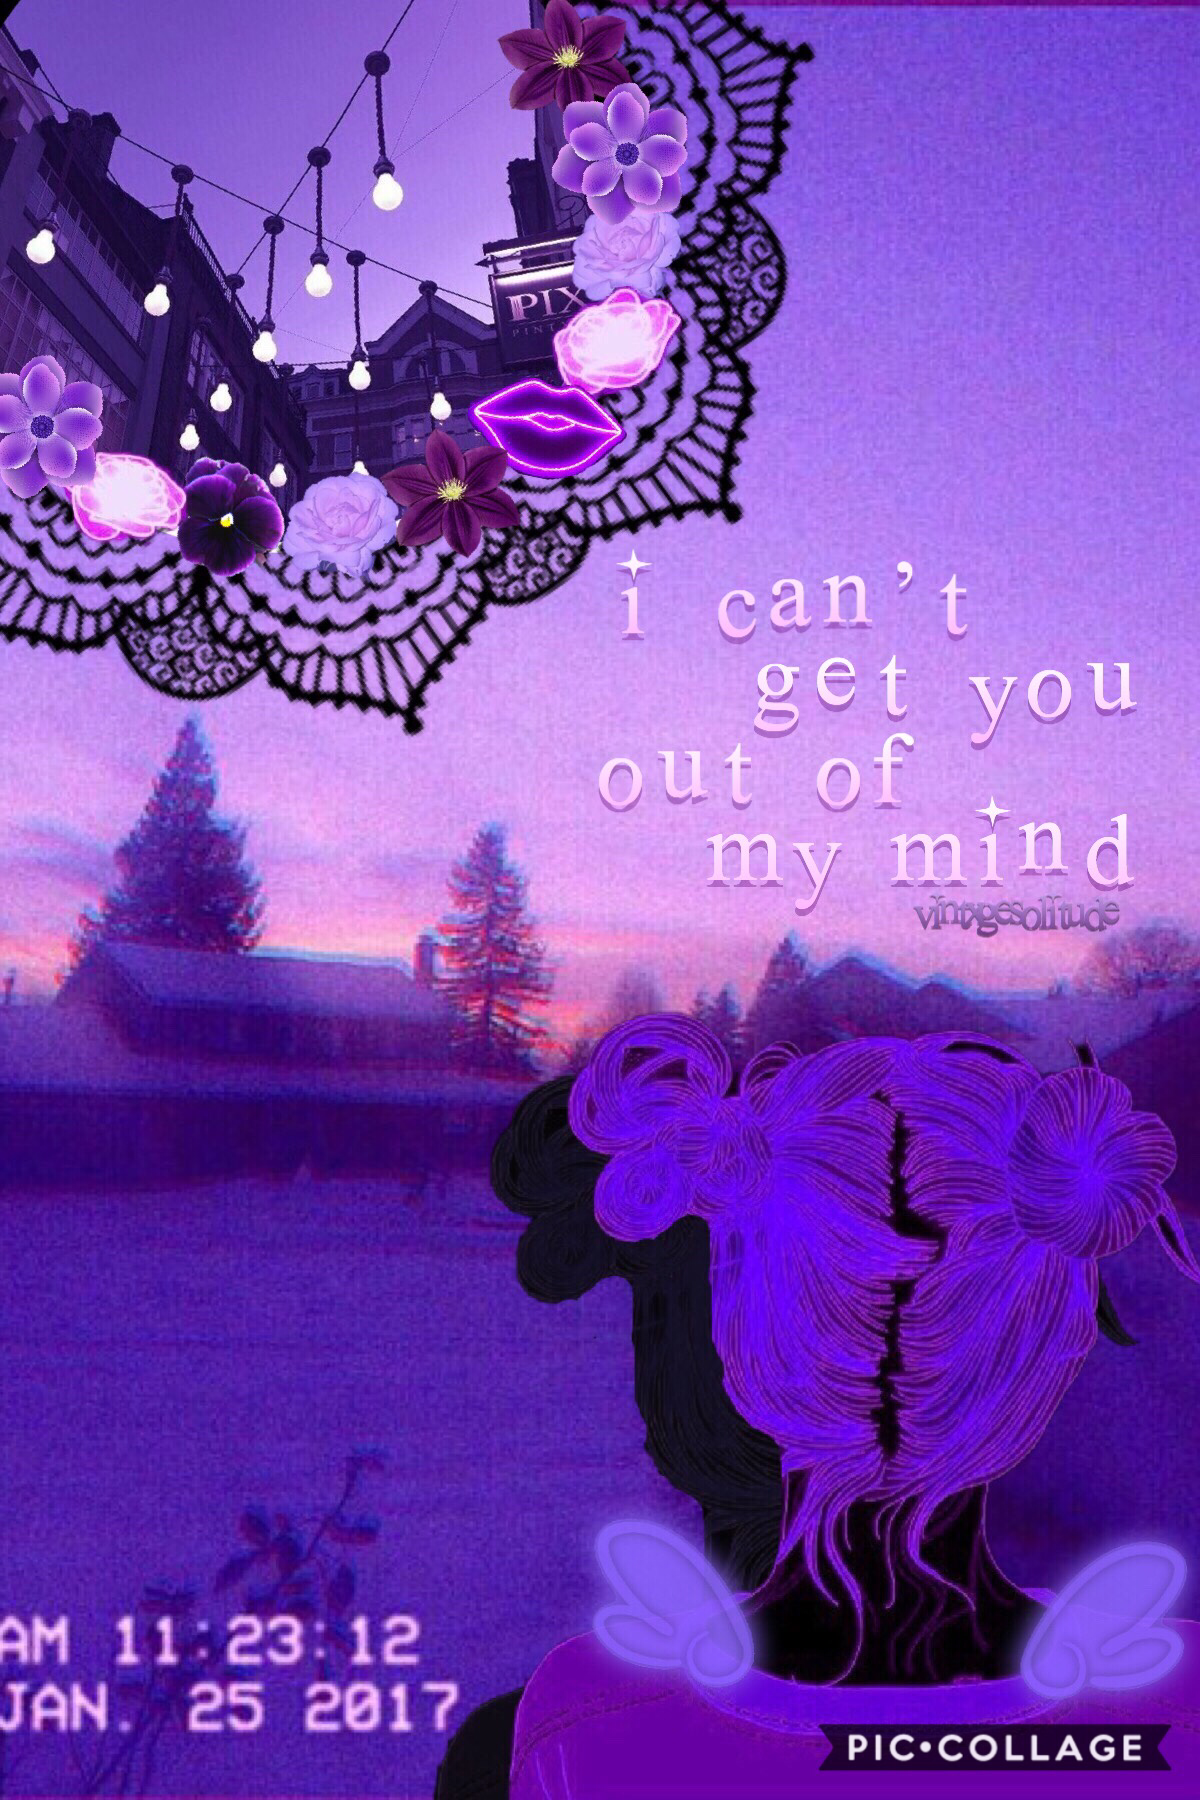 we’re back bois (tap 👾)
this is my unfortunate attempt of being aesthetic wow
also i hate everything about this other than the text yay 🔮
but we’re back in business yee yee
RAINBOW #6 - PURPLE 💜
-xoxo ella